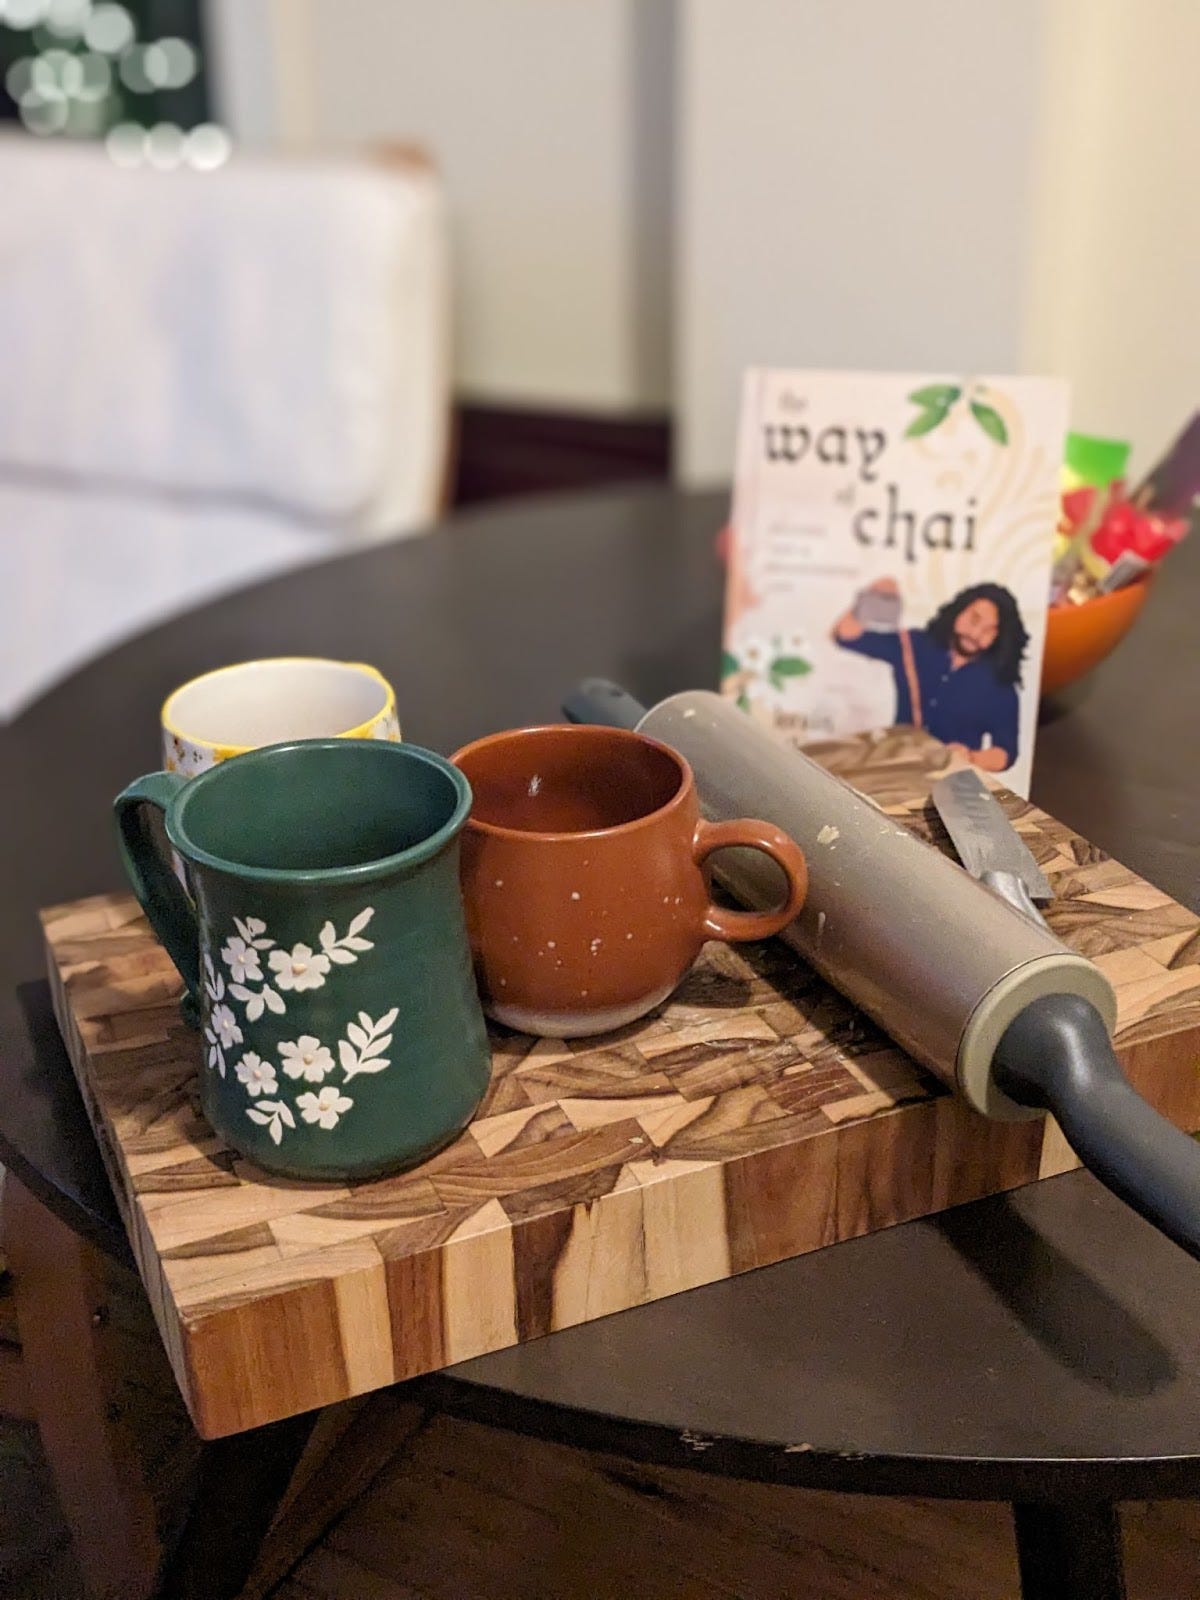 3 mugs sit atop a thick cutting board. There is a green mug with white flowers on it, a smaller and rounder brown mug and a white mug with yellow flowers. Behind is a book title "the way of the chai" with an animation of the author pouring themself a cup of chai